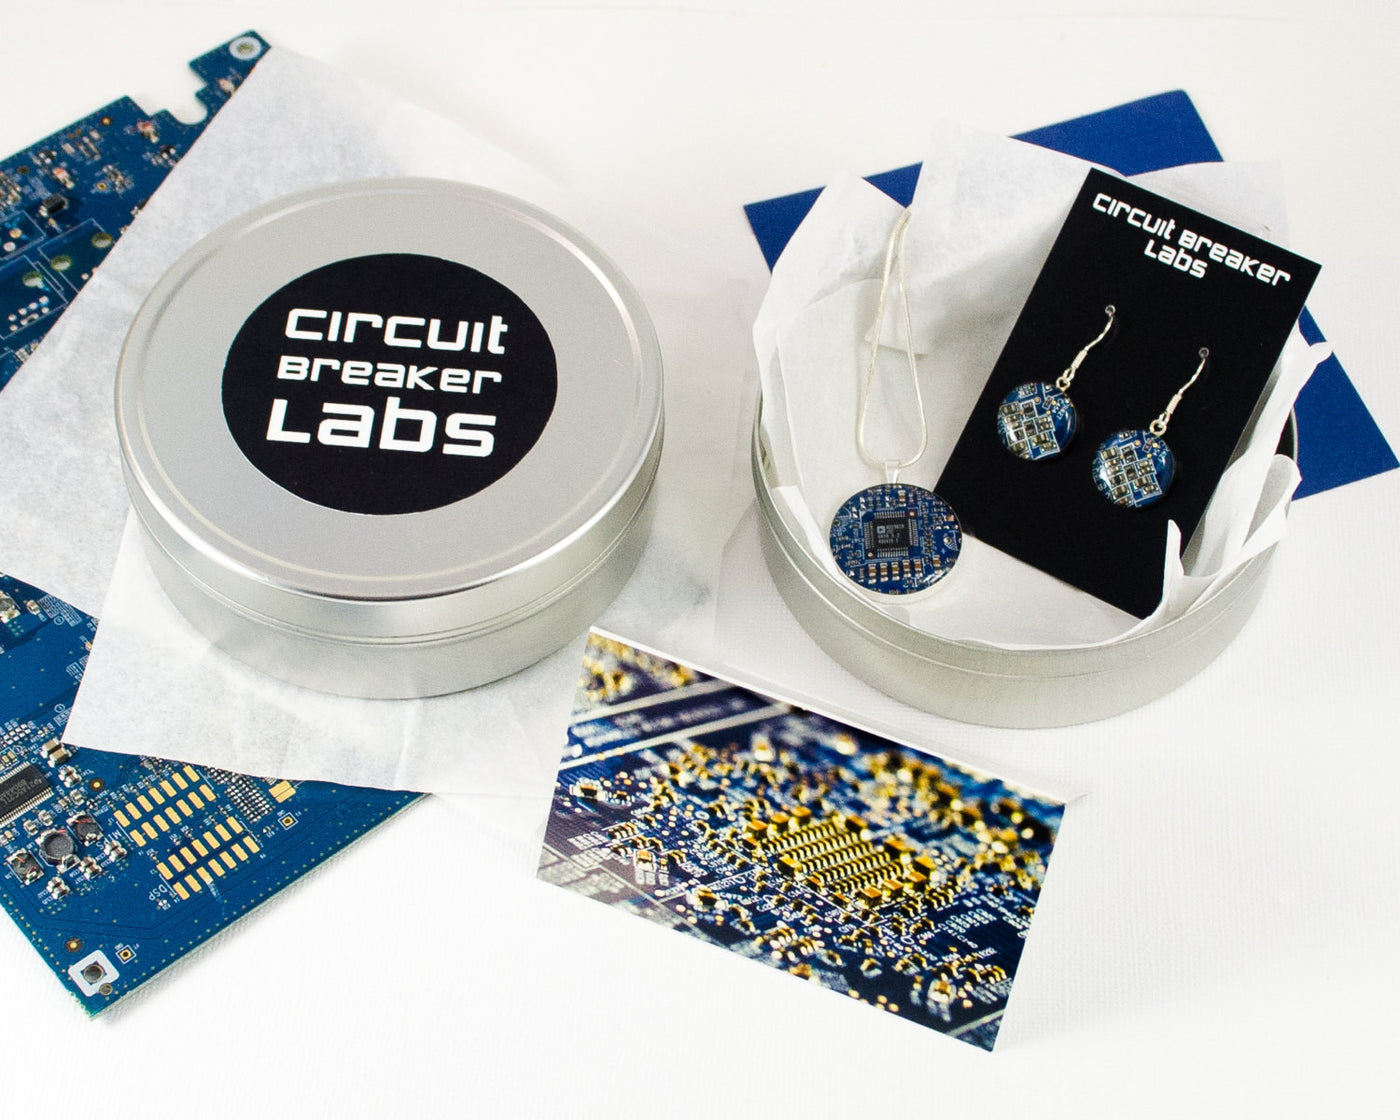 Circuit Board Graduation Gift Set with Tie Bar